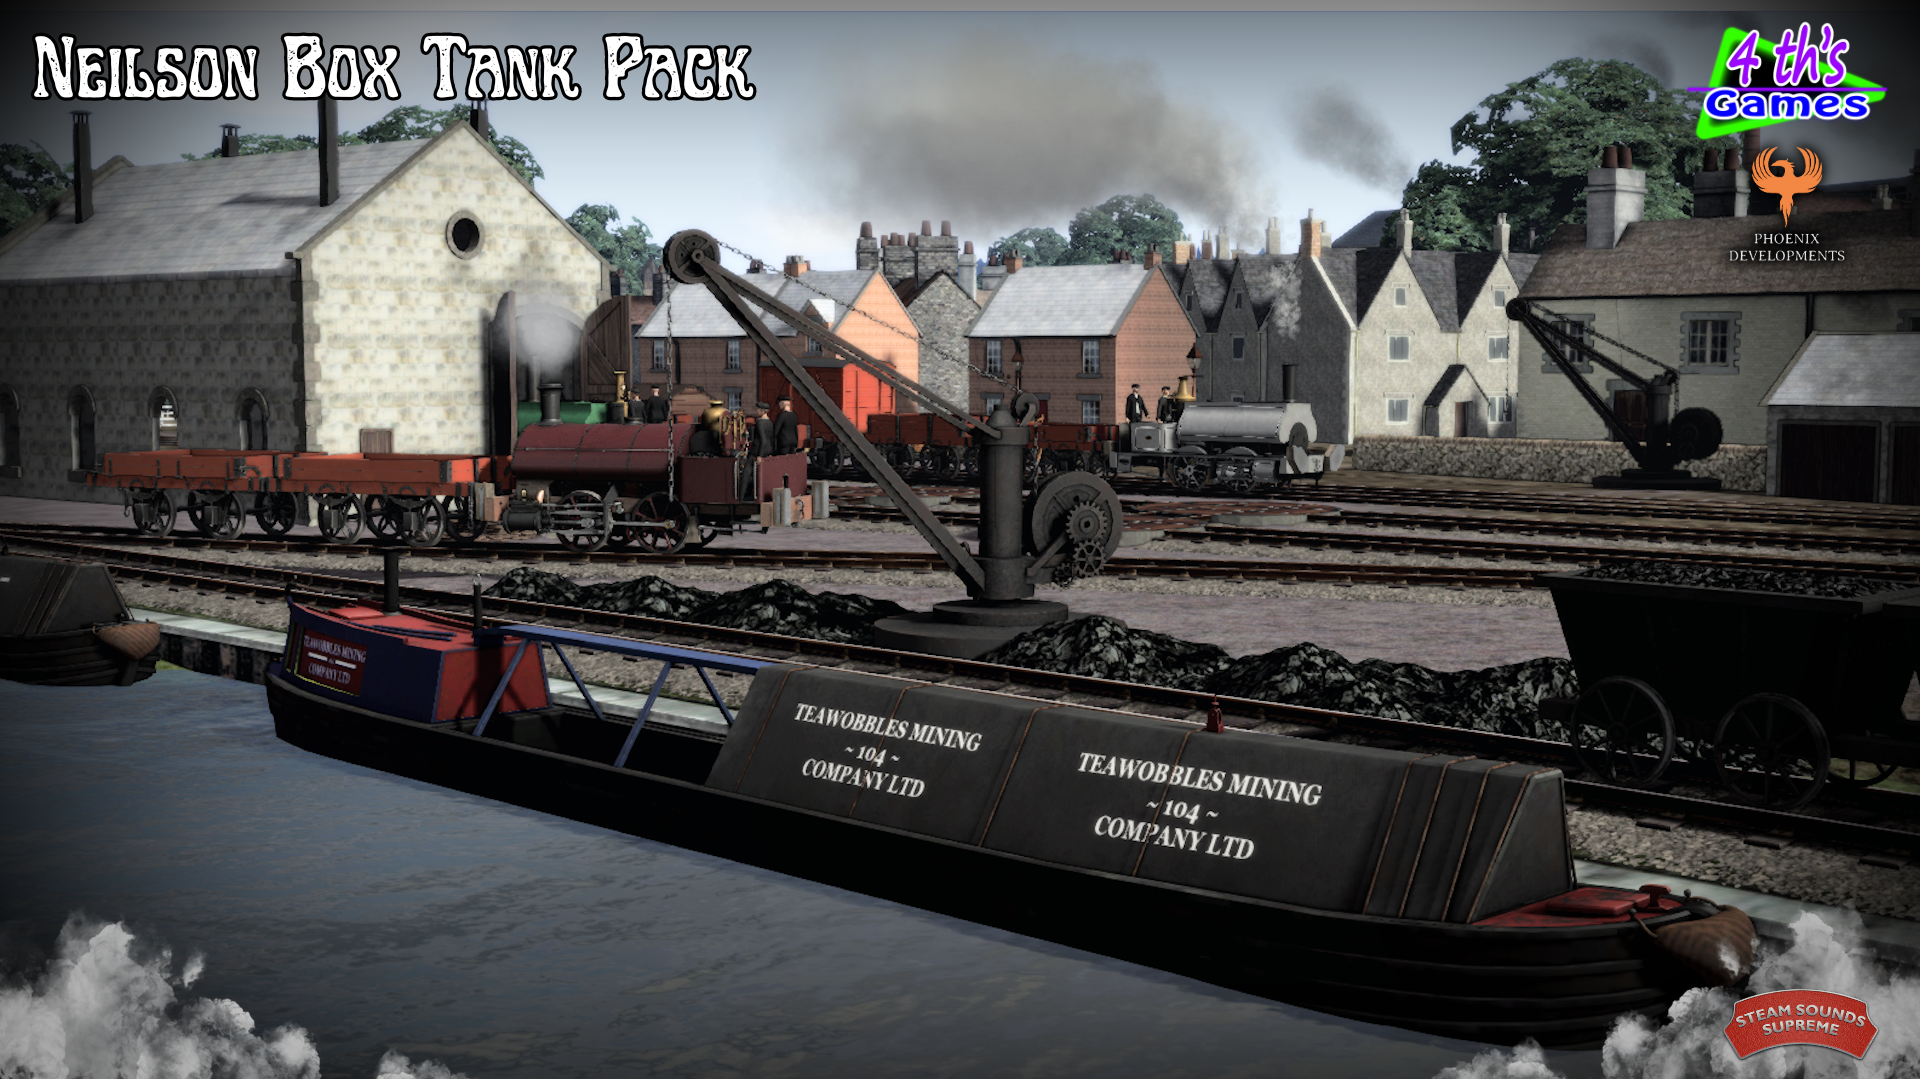 Neilson Box Tank Pack_Contents13.png